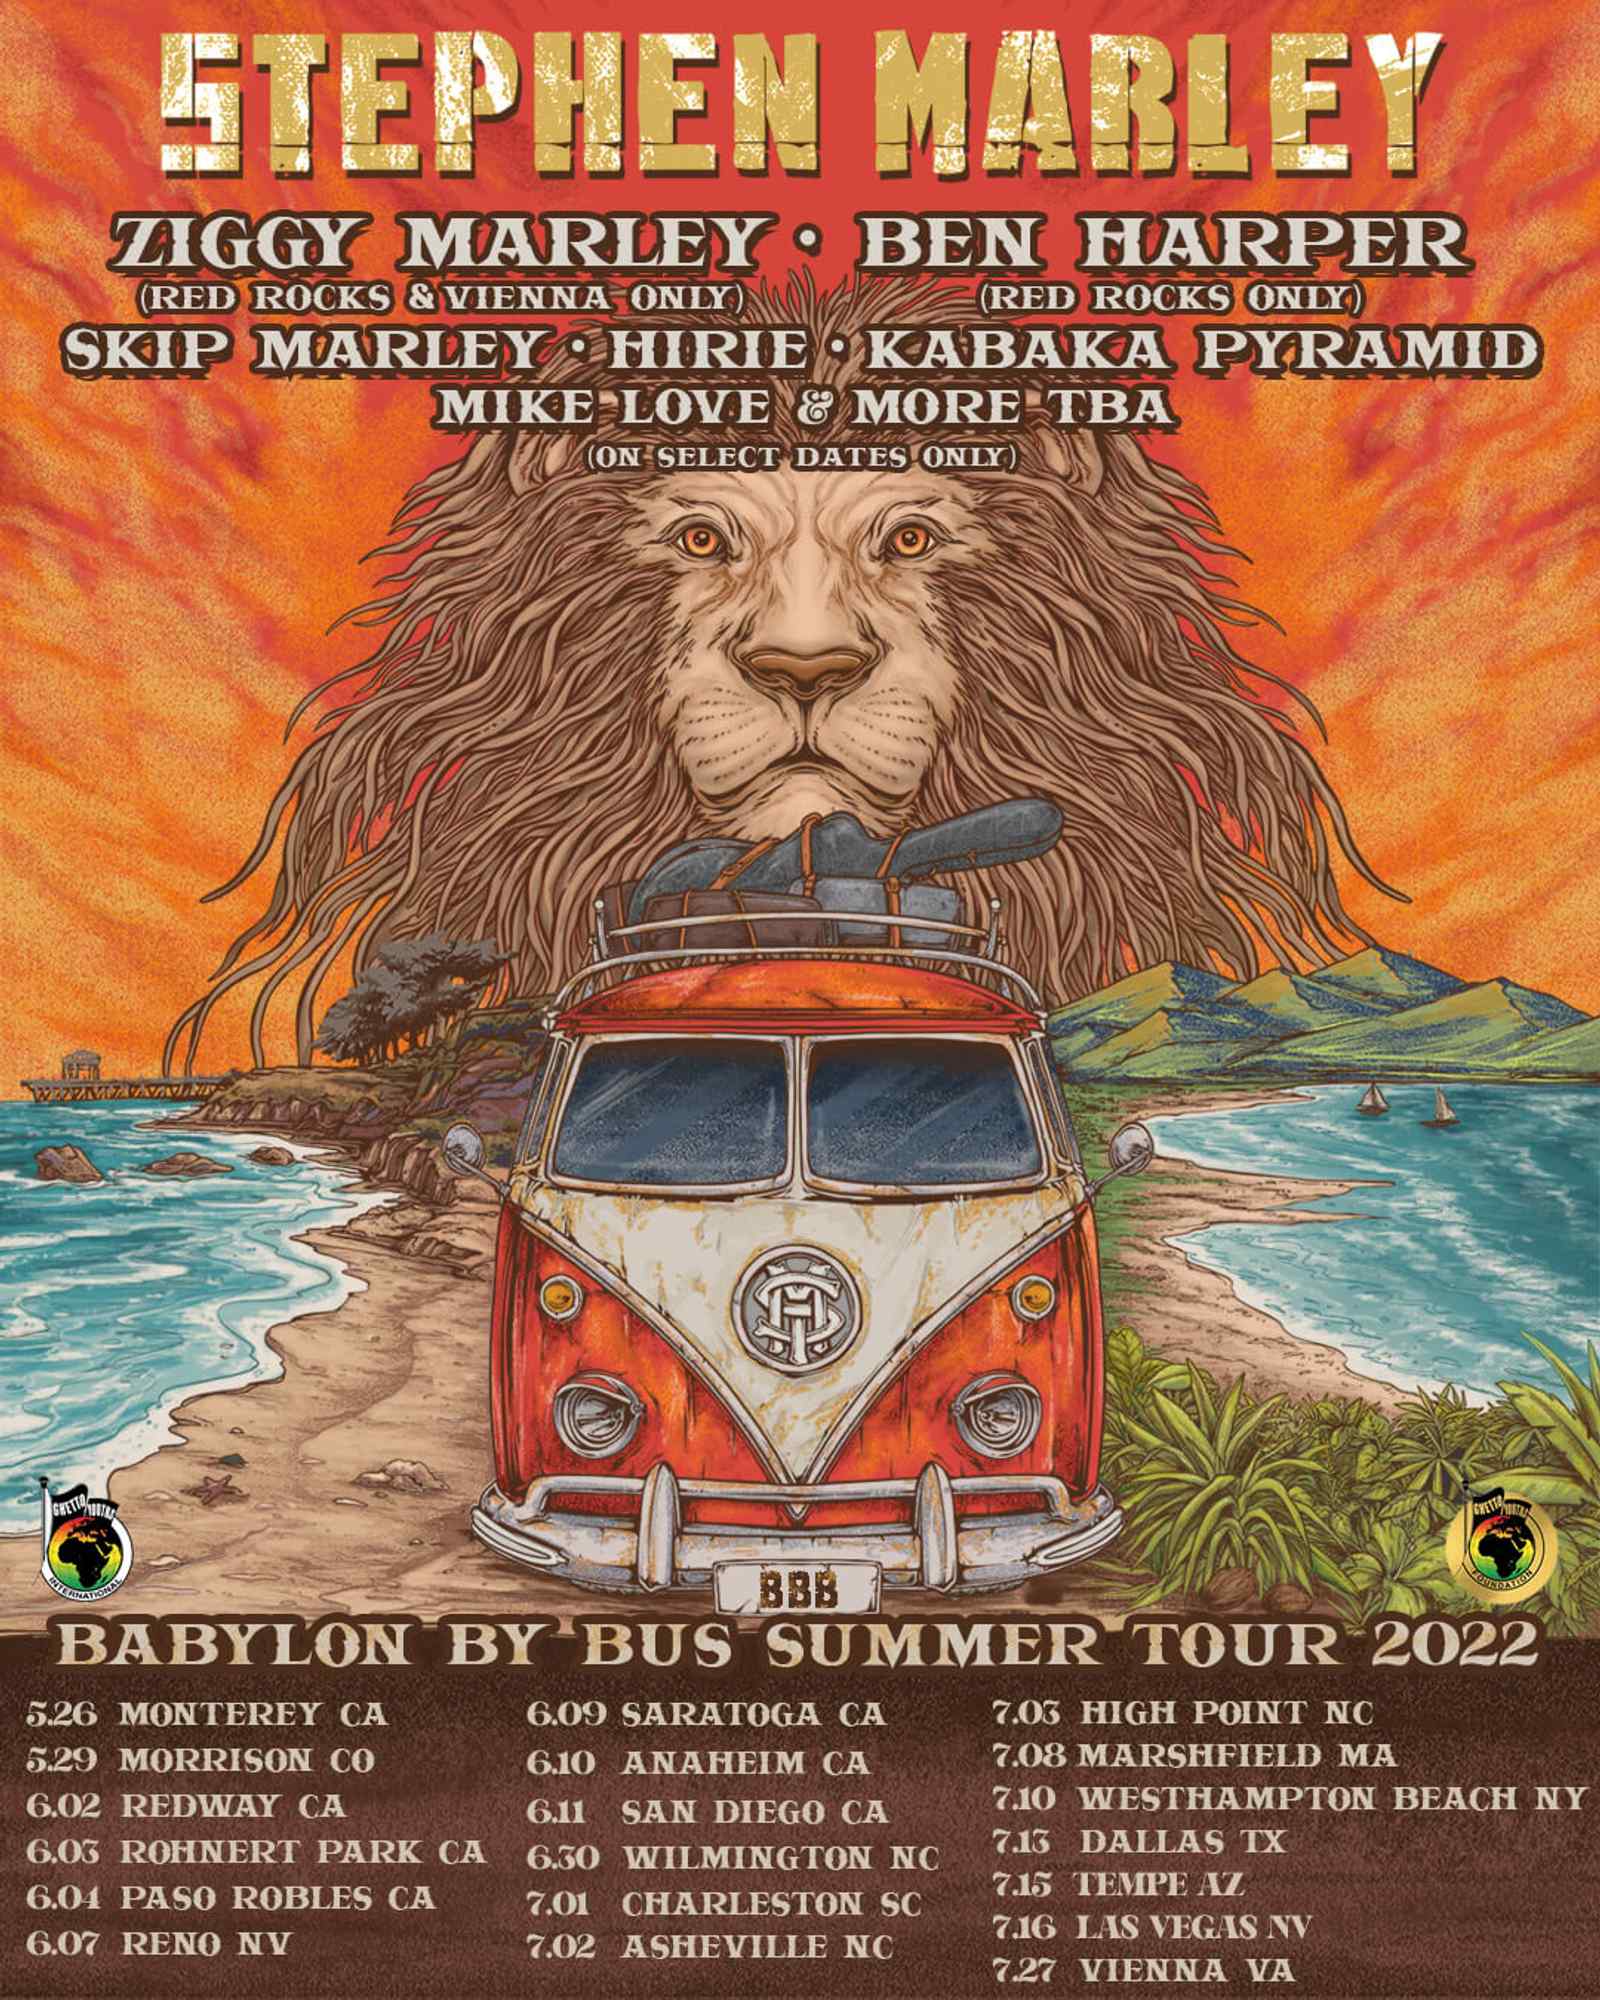 Babylon By Bus Summer Tour 2022 Just Announced!!